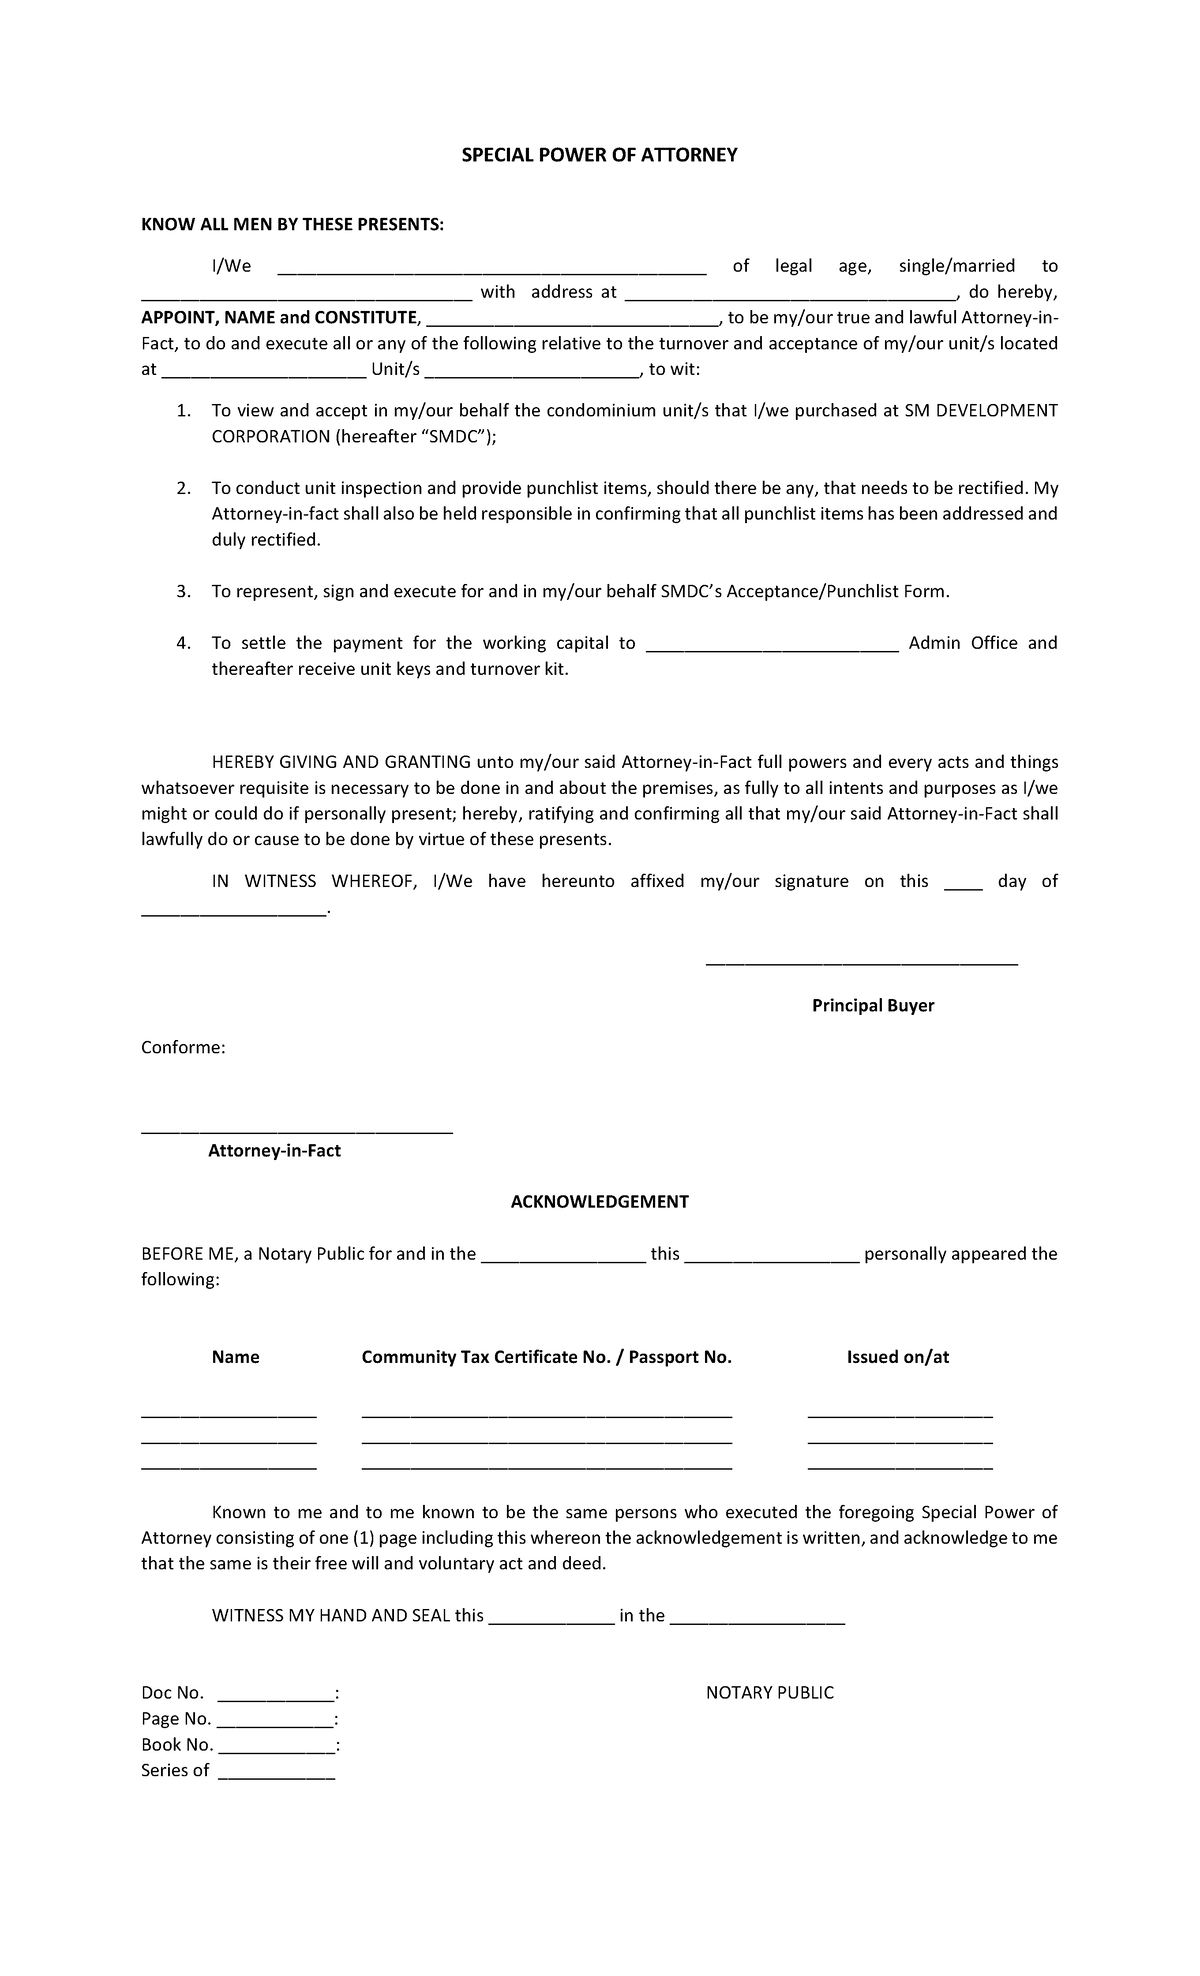 Special Power Of Attorney Form Special Power Of Attorney Know All Men By These Presents Iwe 2197